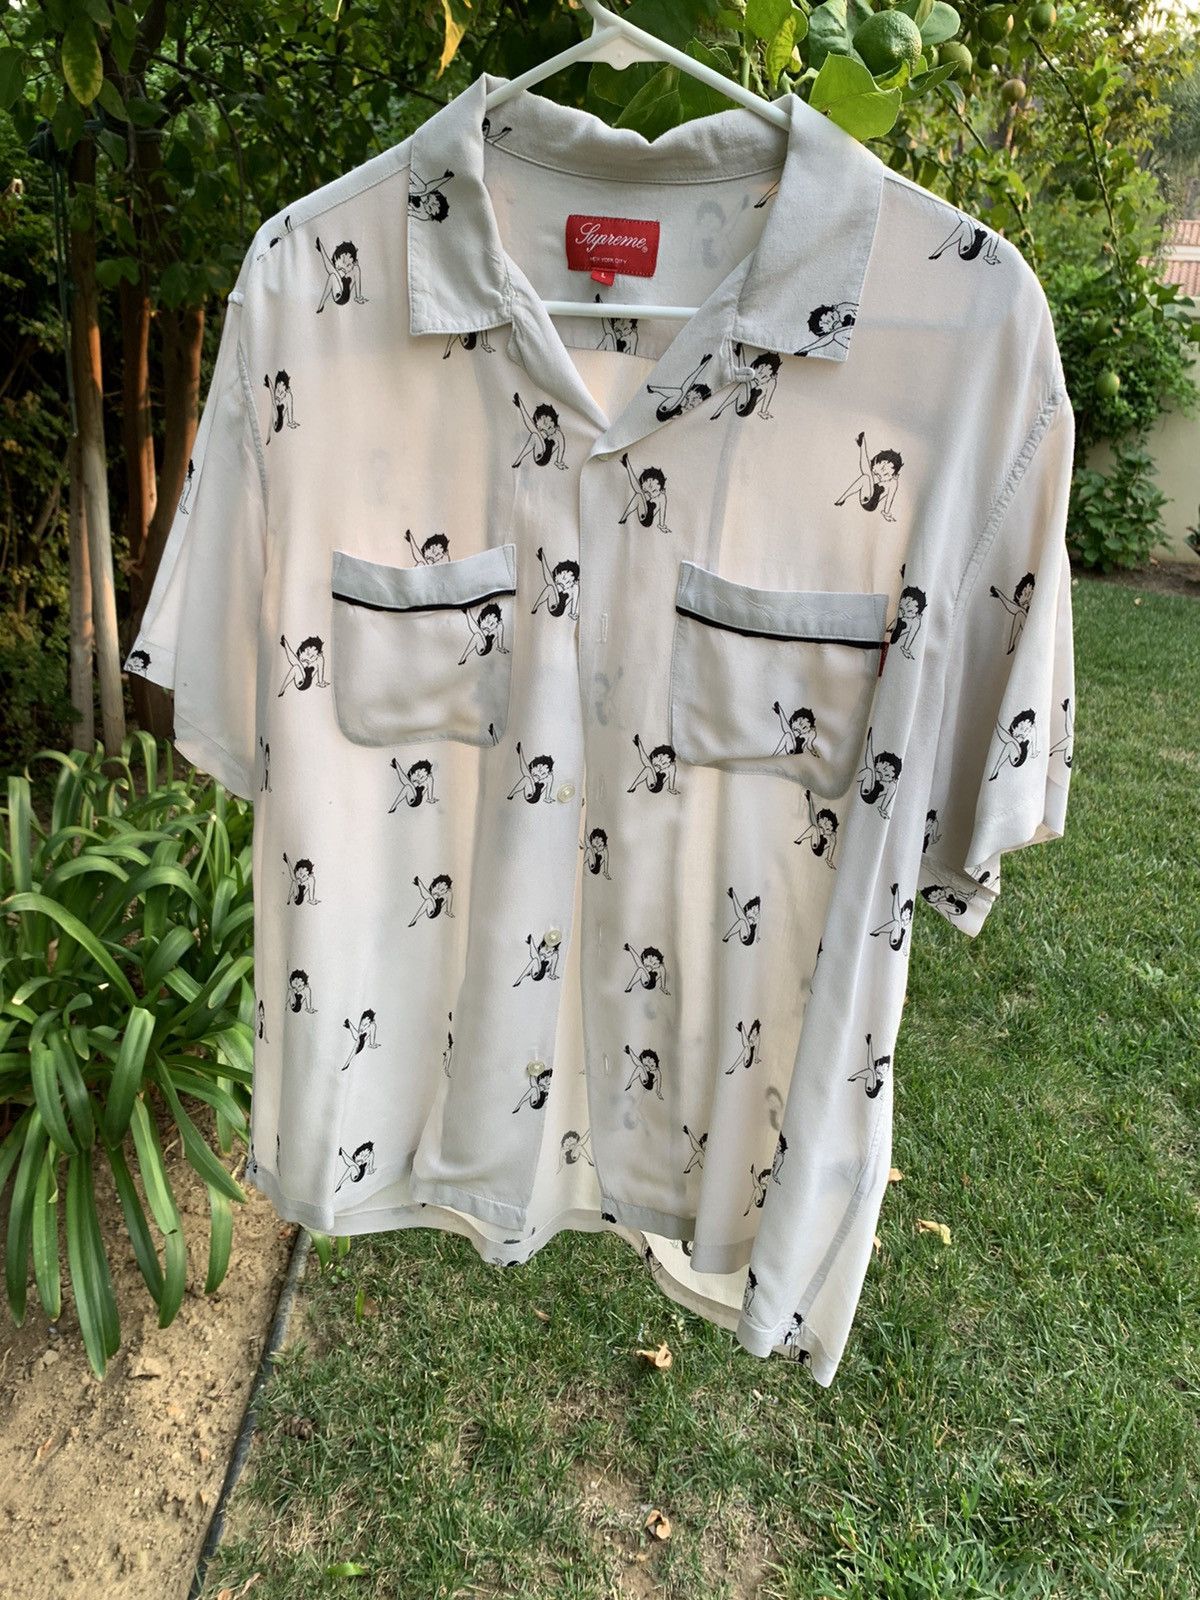 Supreme Betty Boop SS16 rayon button up shirt | Grailed